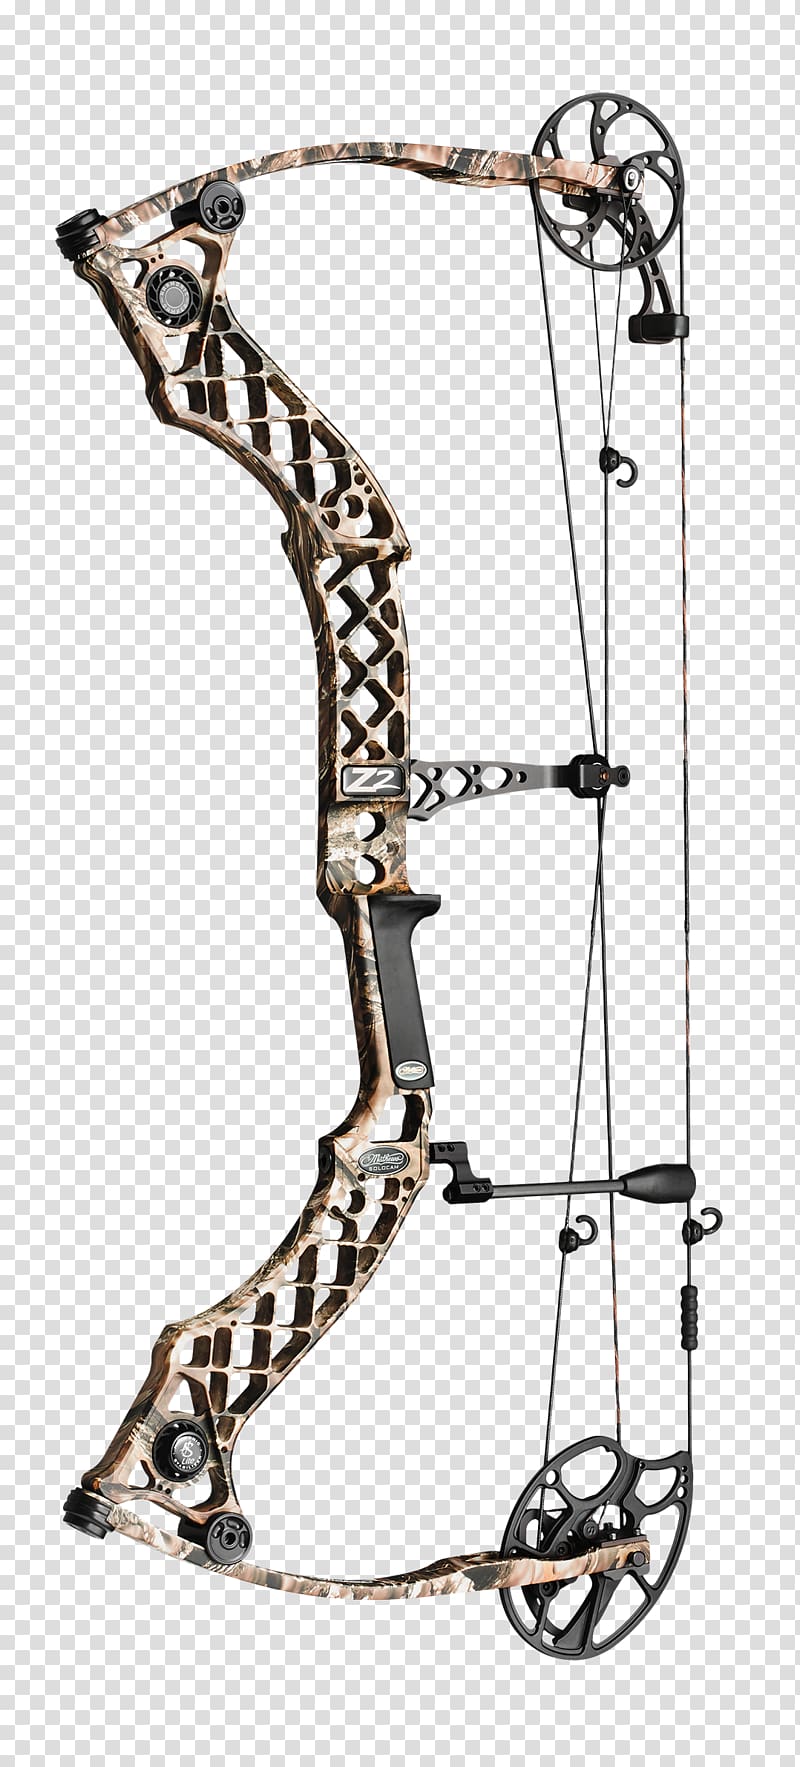 Compound Bows Archery Bow and arrow Bowhunting, archery puppies transparent background PNG clipart